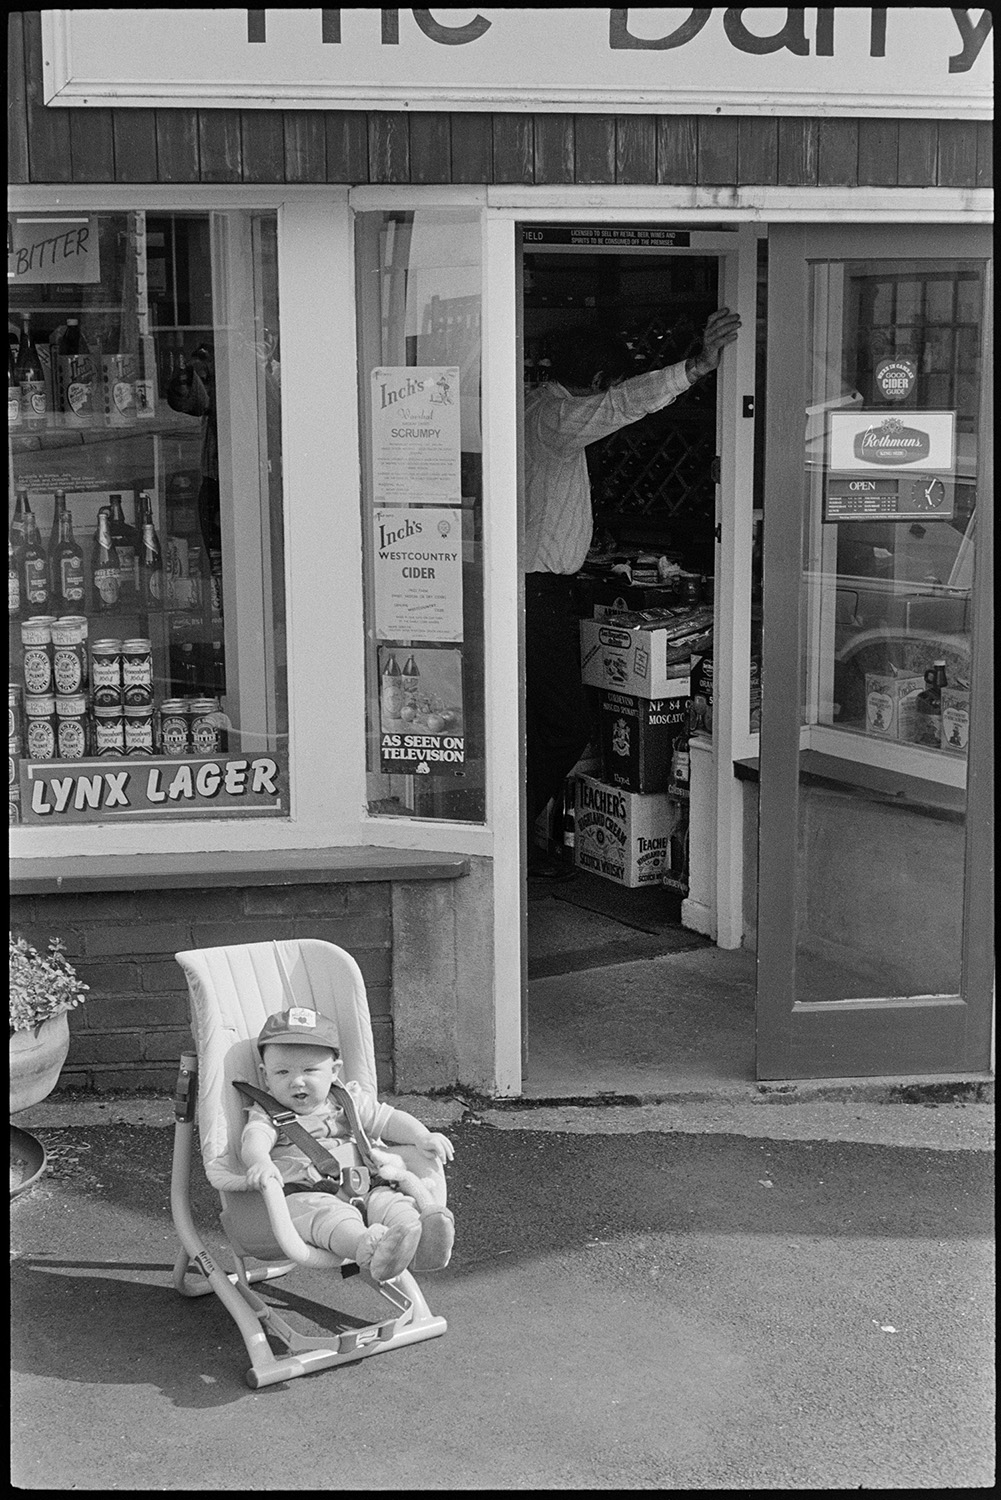 Baby in chair sitting outside shop.
[A young child sitting in a car seat outside The Dairy shop in Chulmleigh. Inch's Cider posters are displayed, with a window display of lager cans and bottles.]